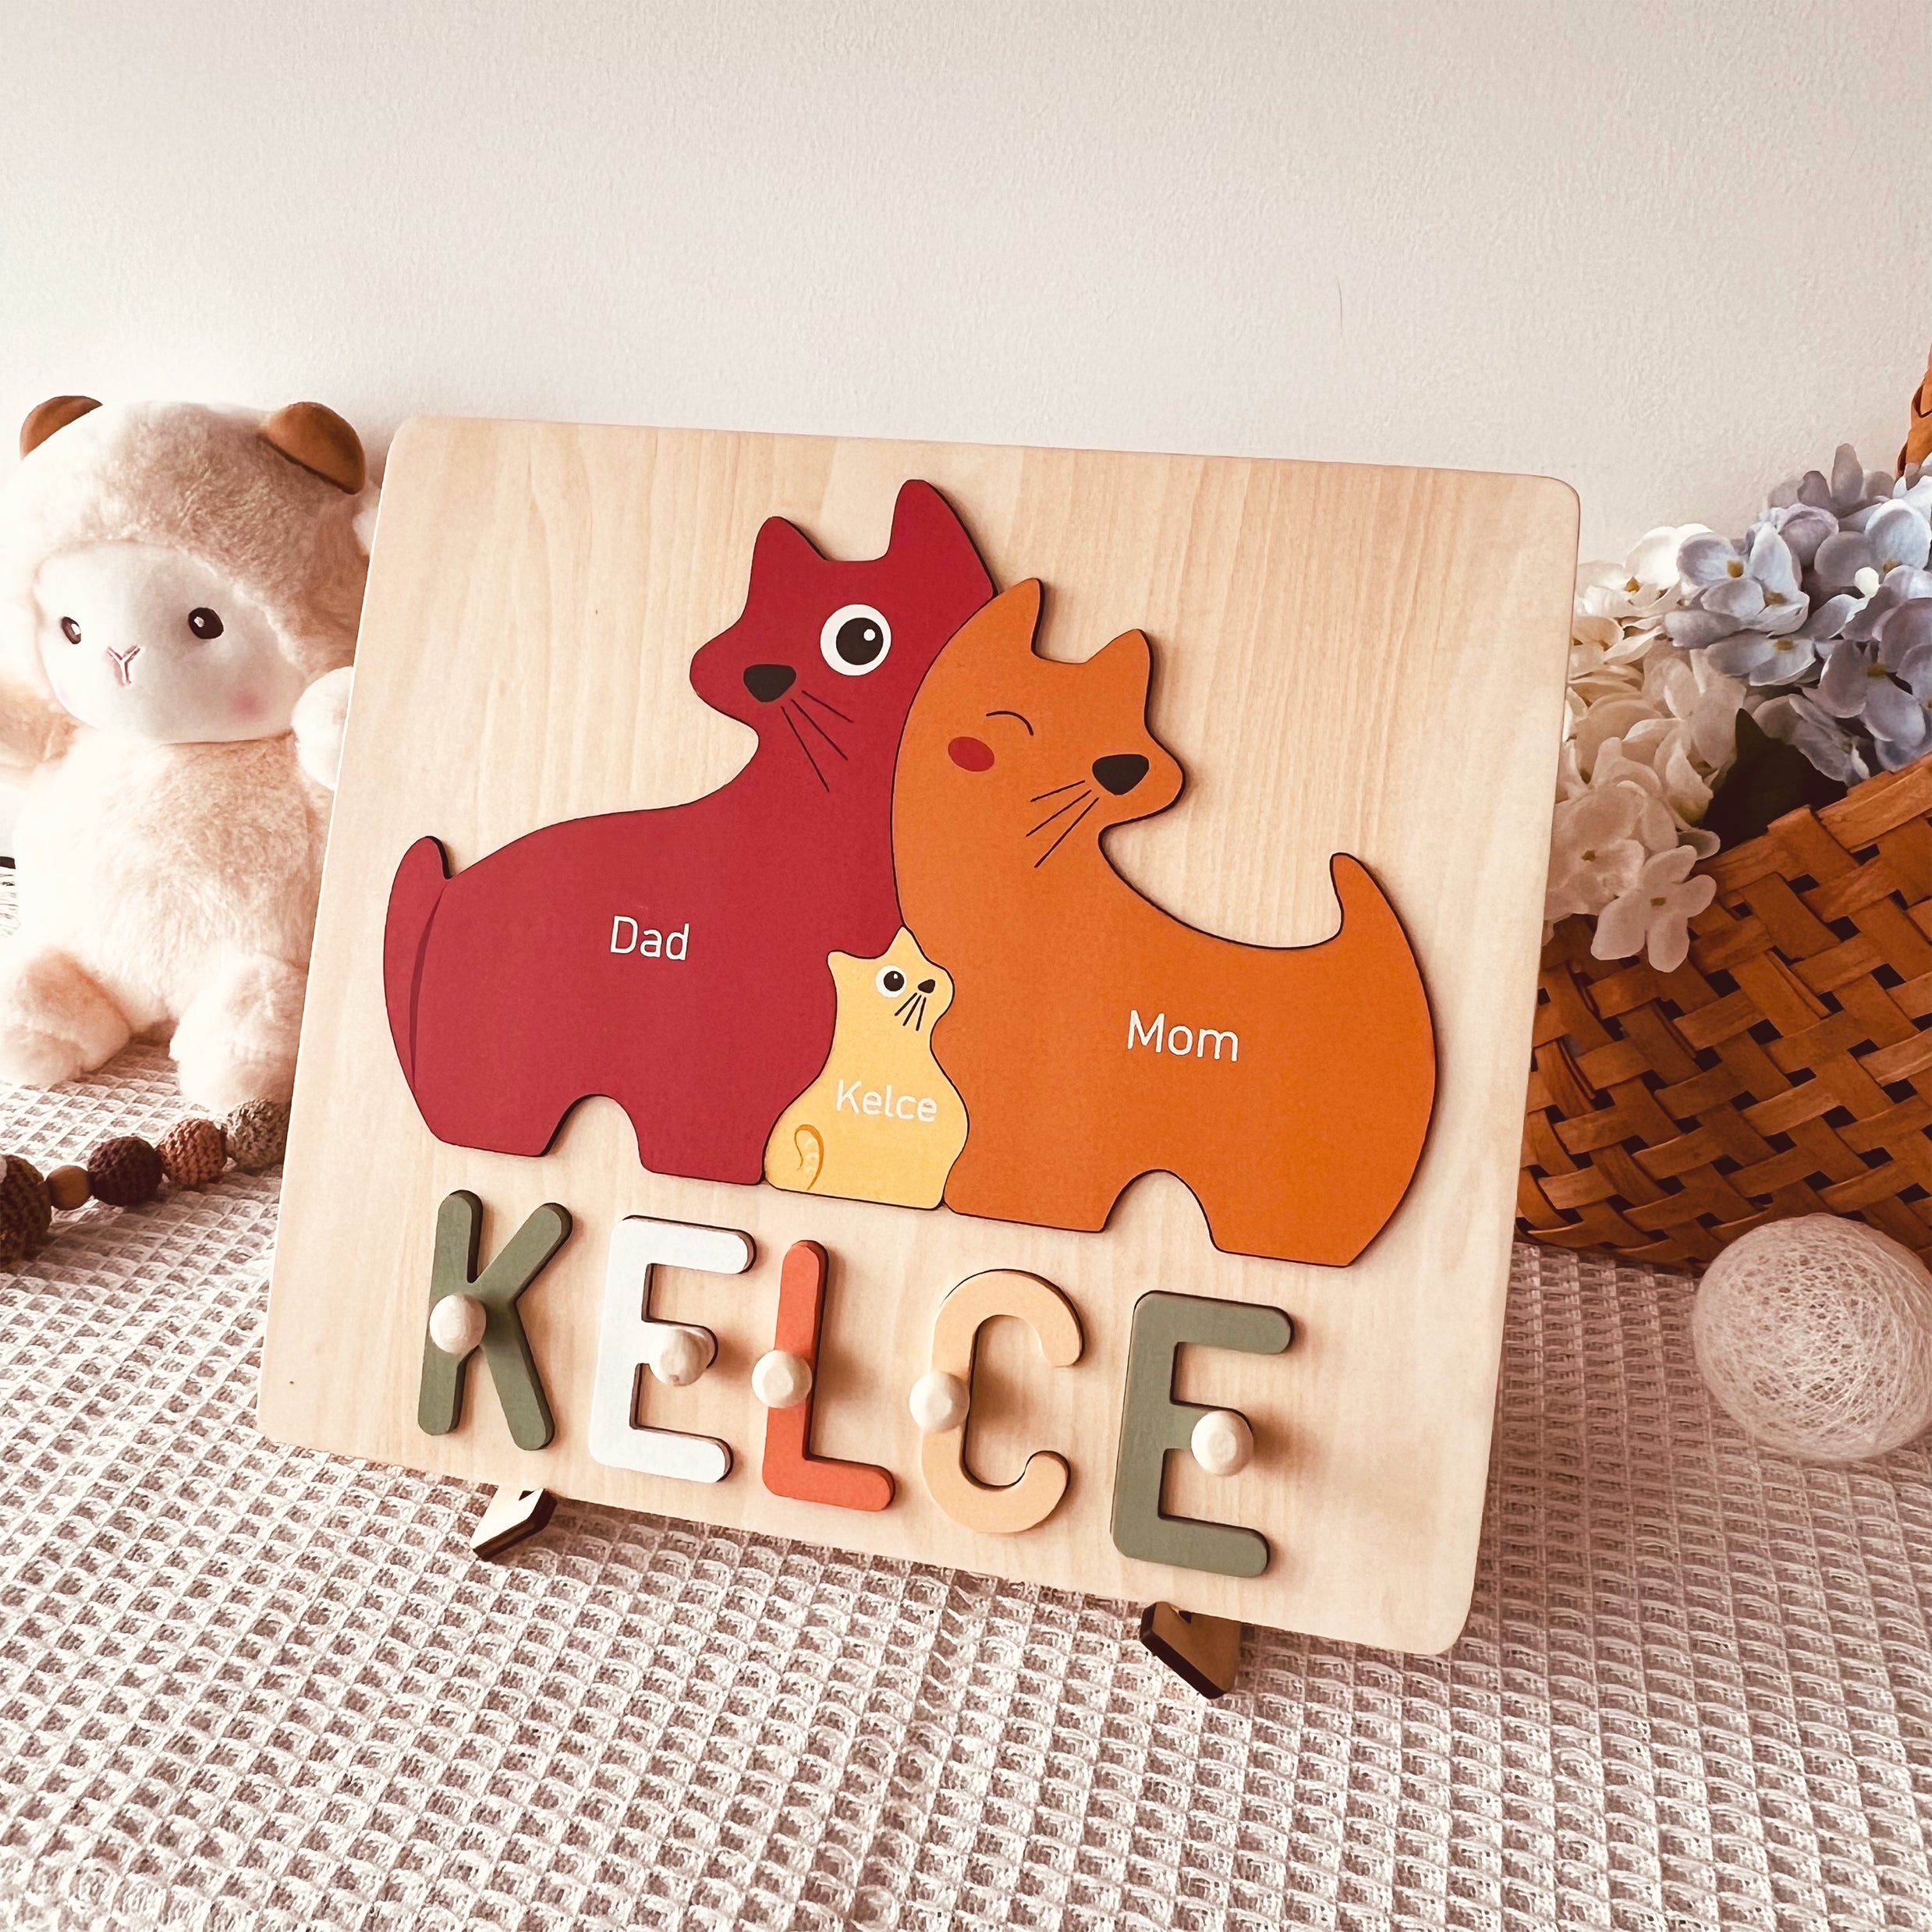 Personalized Wooden Baby Name Puzzle - Family Cat